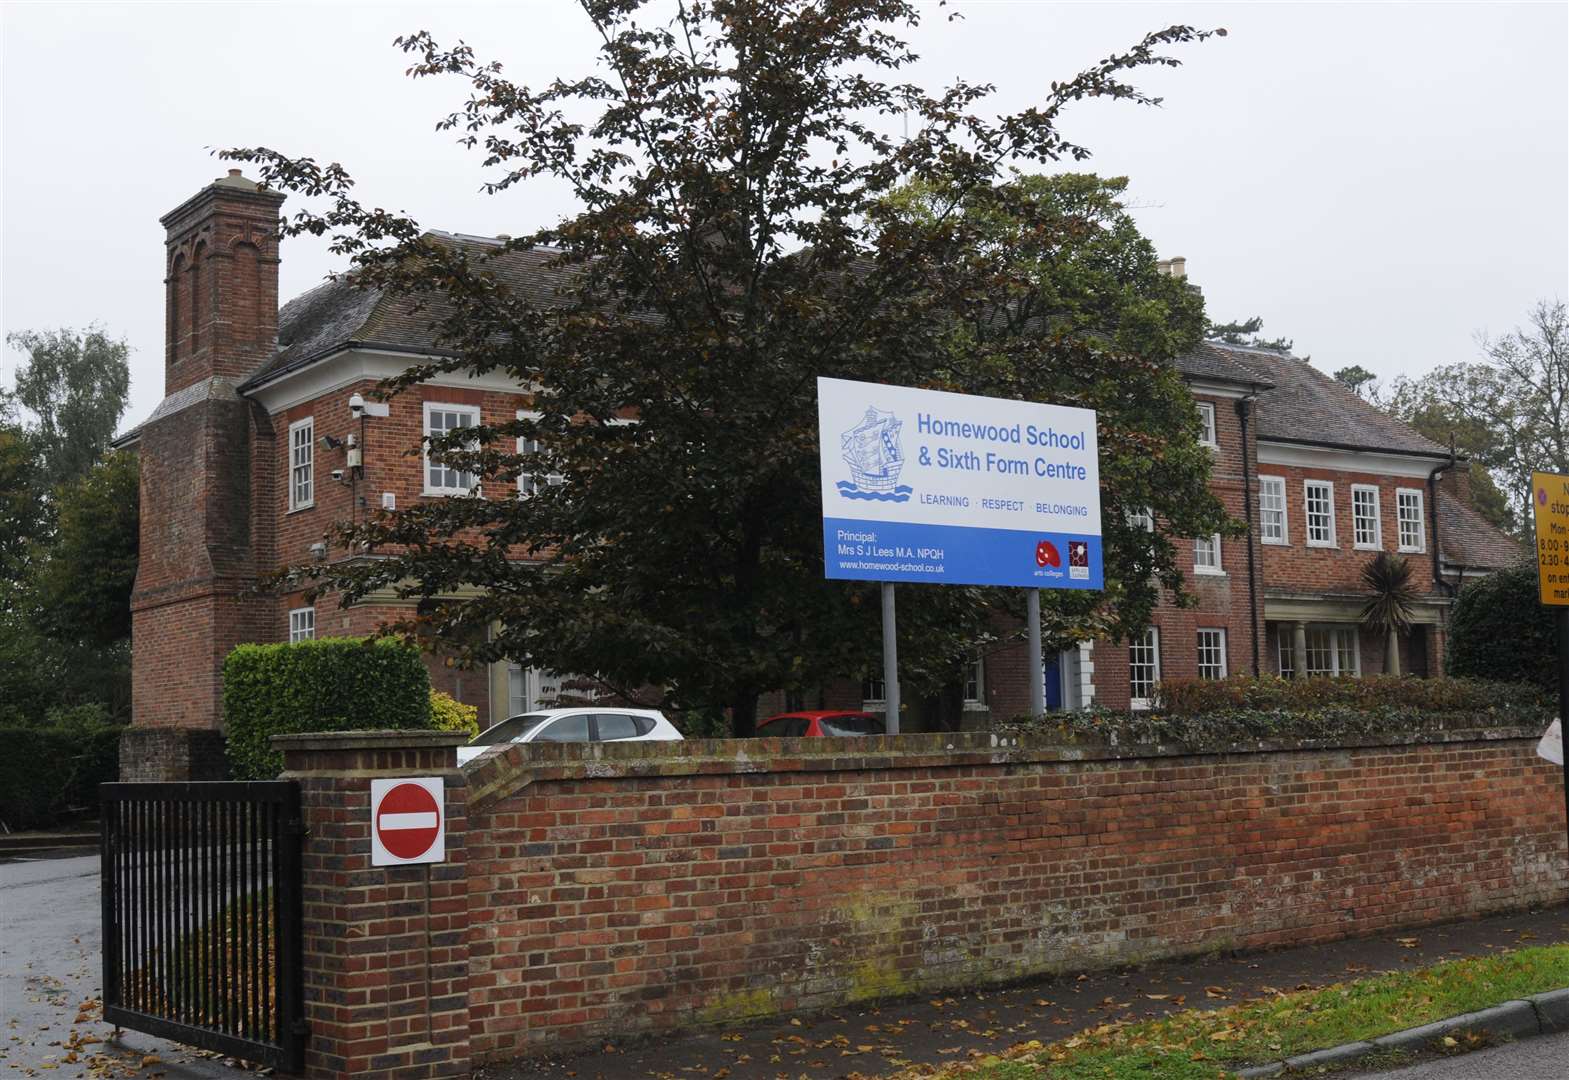 Homewood School in Tenterden is one of the four distant schools that Cranbrook children are forced to chose